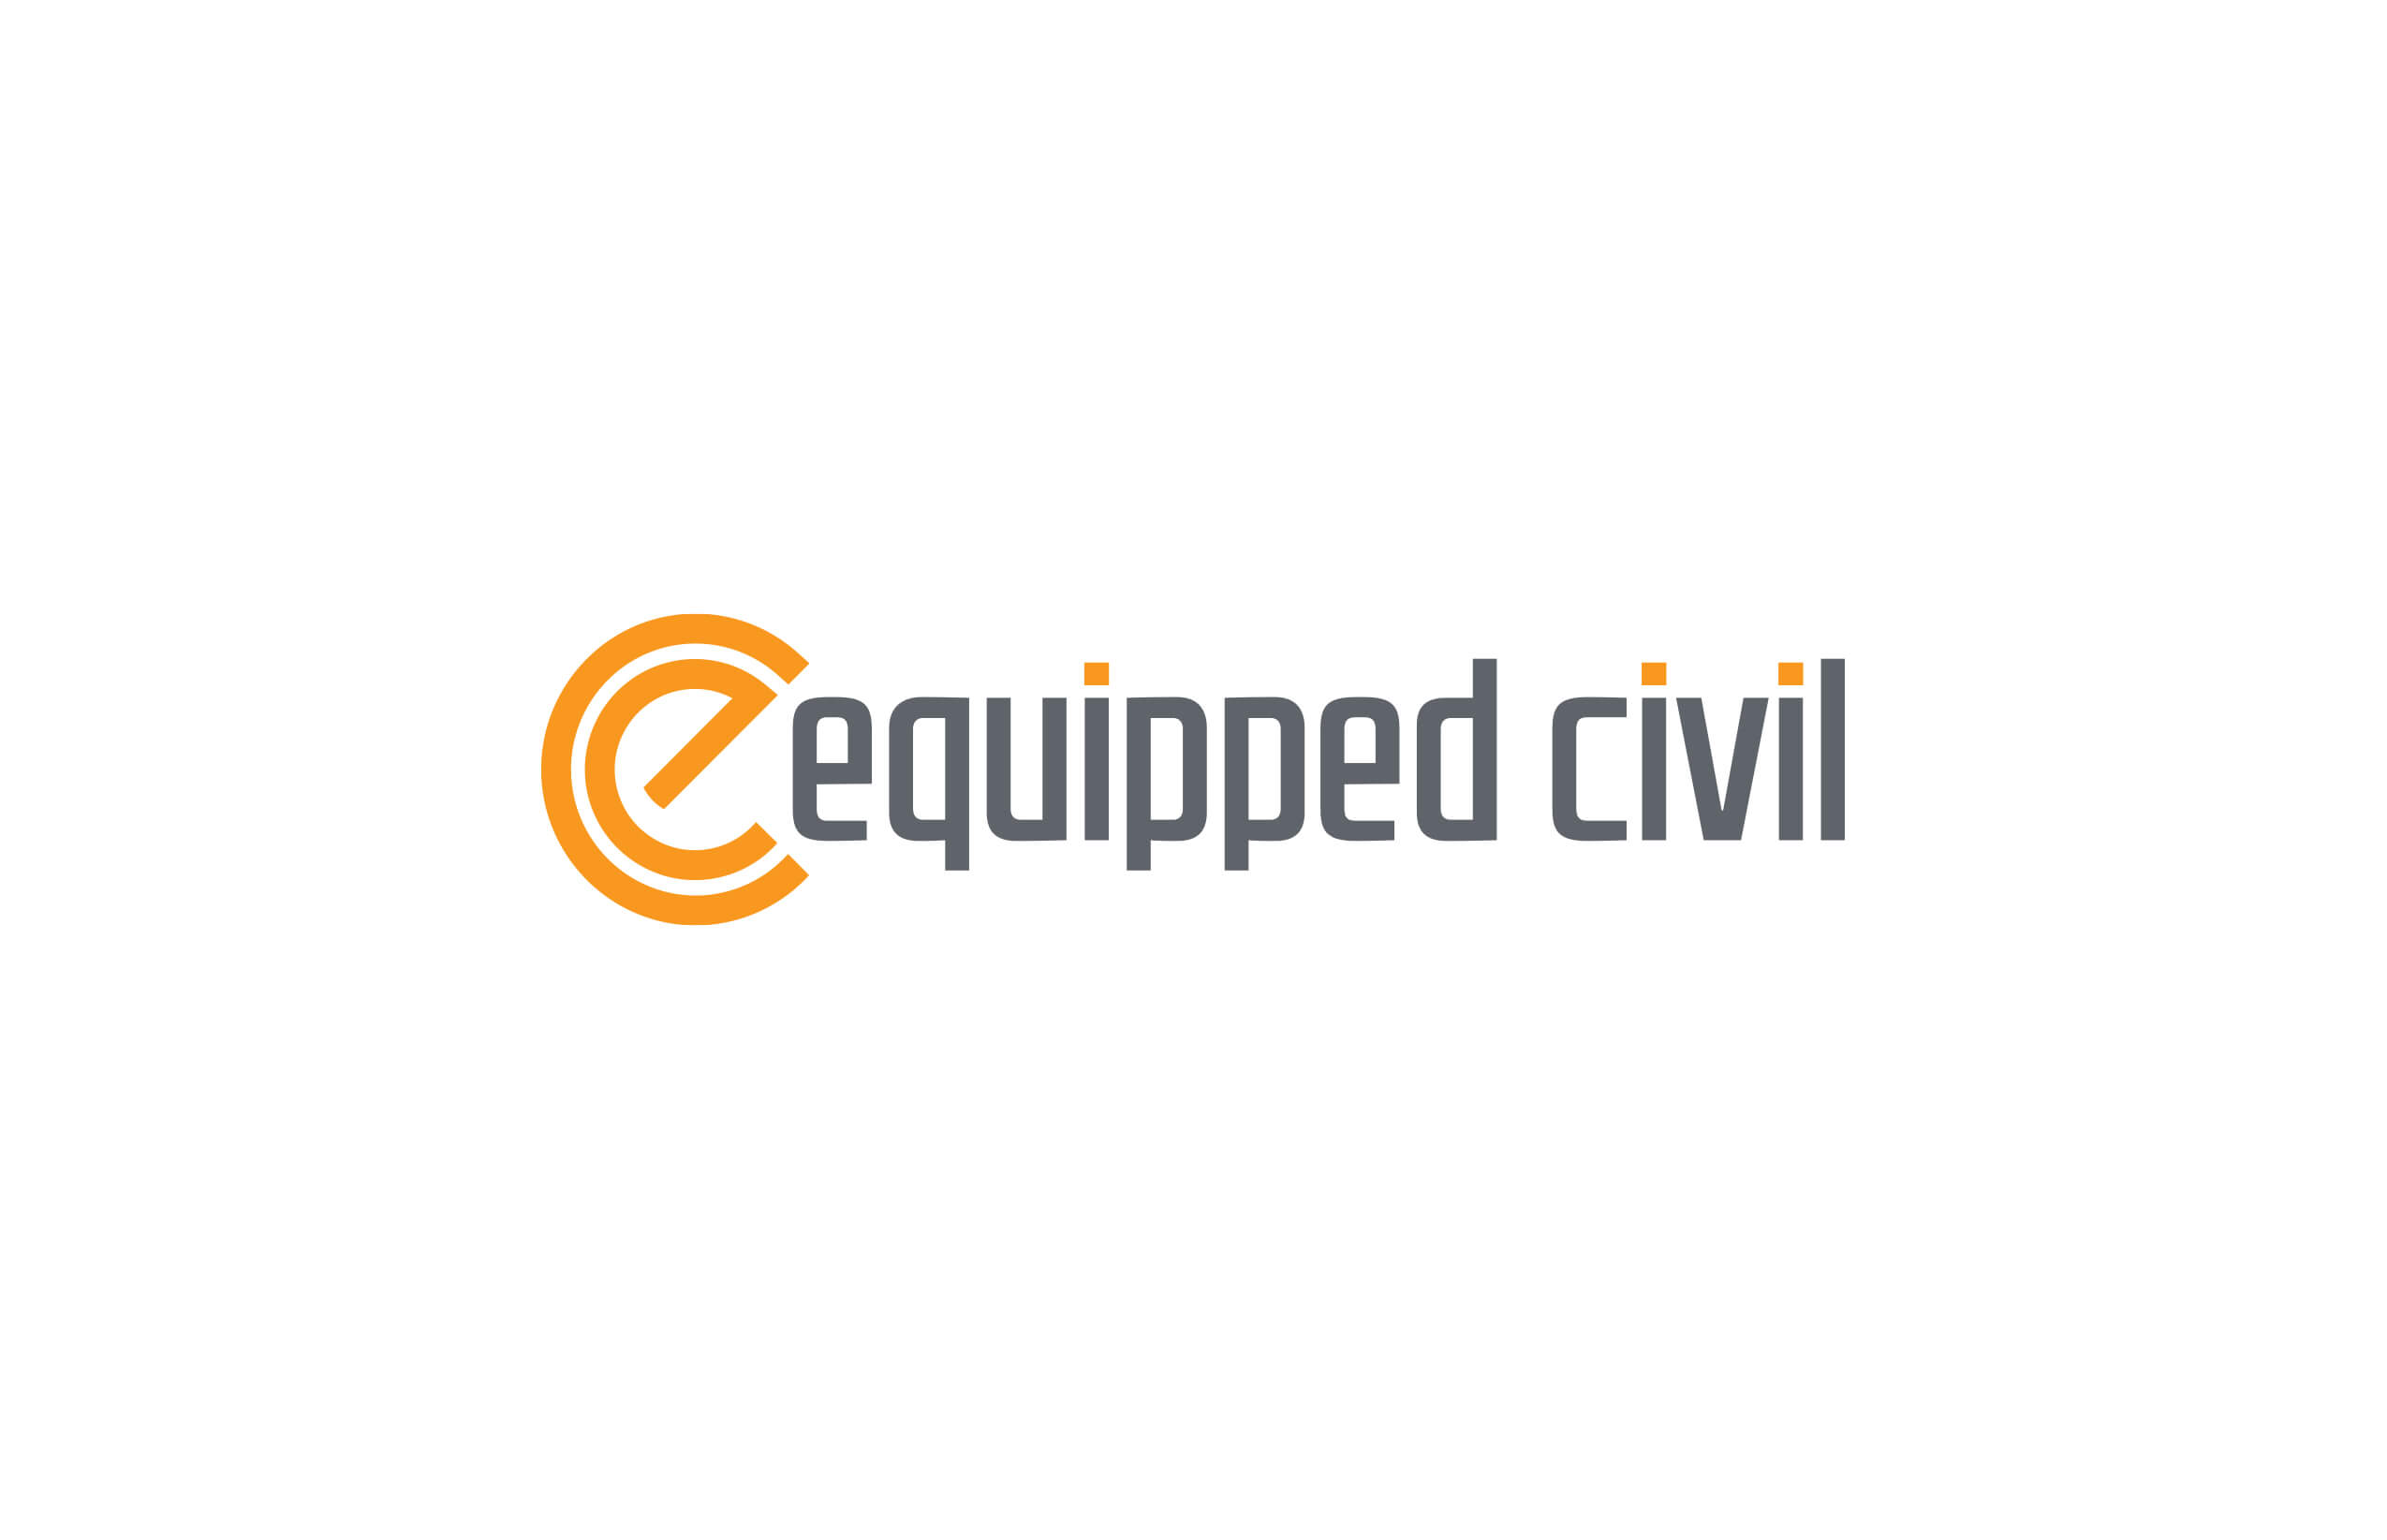 Icon Web Design Adelaide. Image of Equipped Civil logo